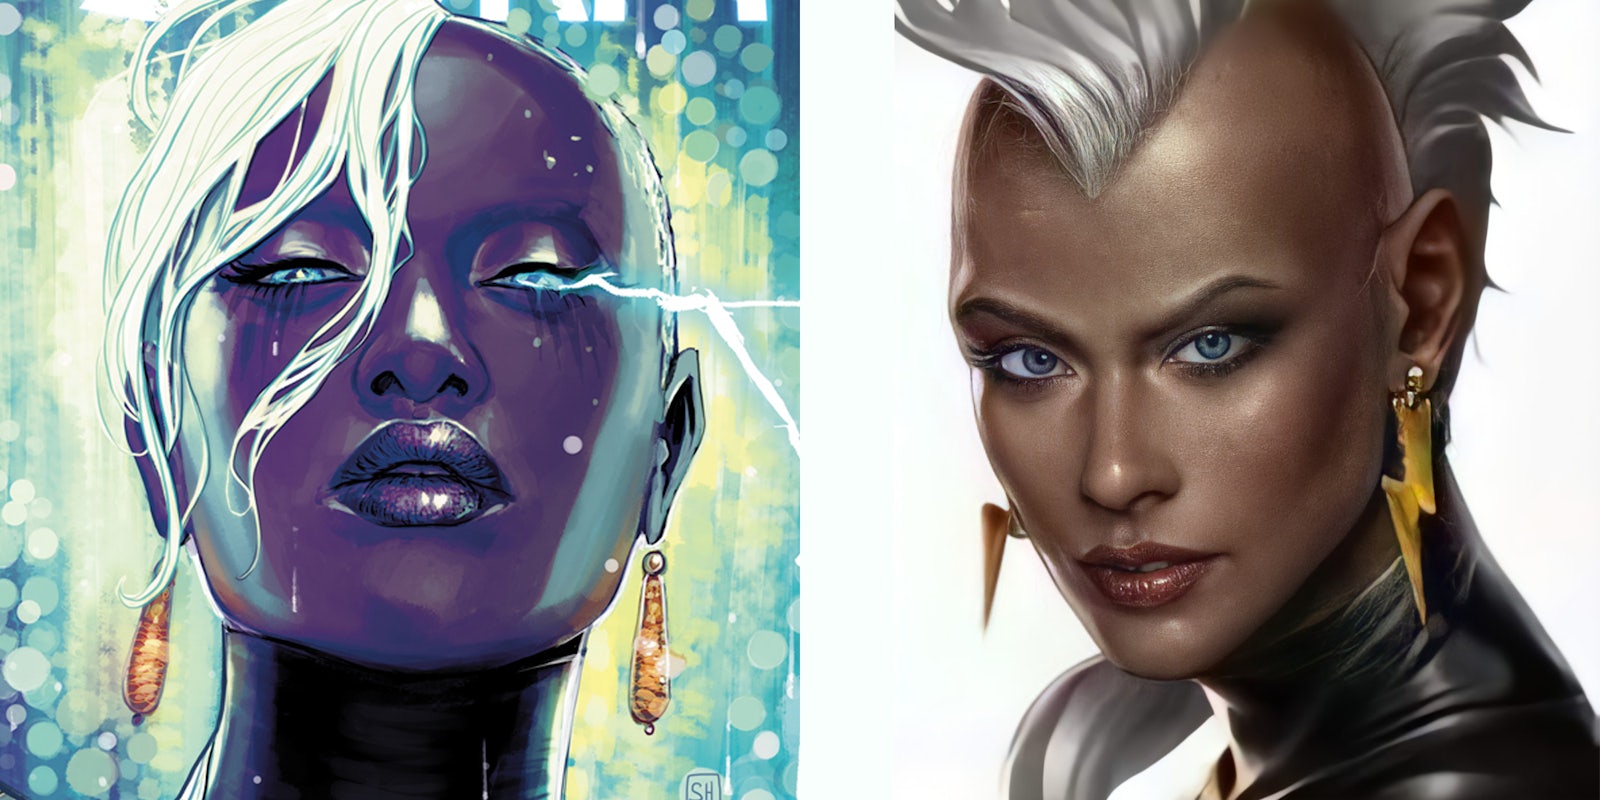 Comparison of comic book Storm with Black features to 'Future Fight' game Storm with Caucasian features